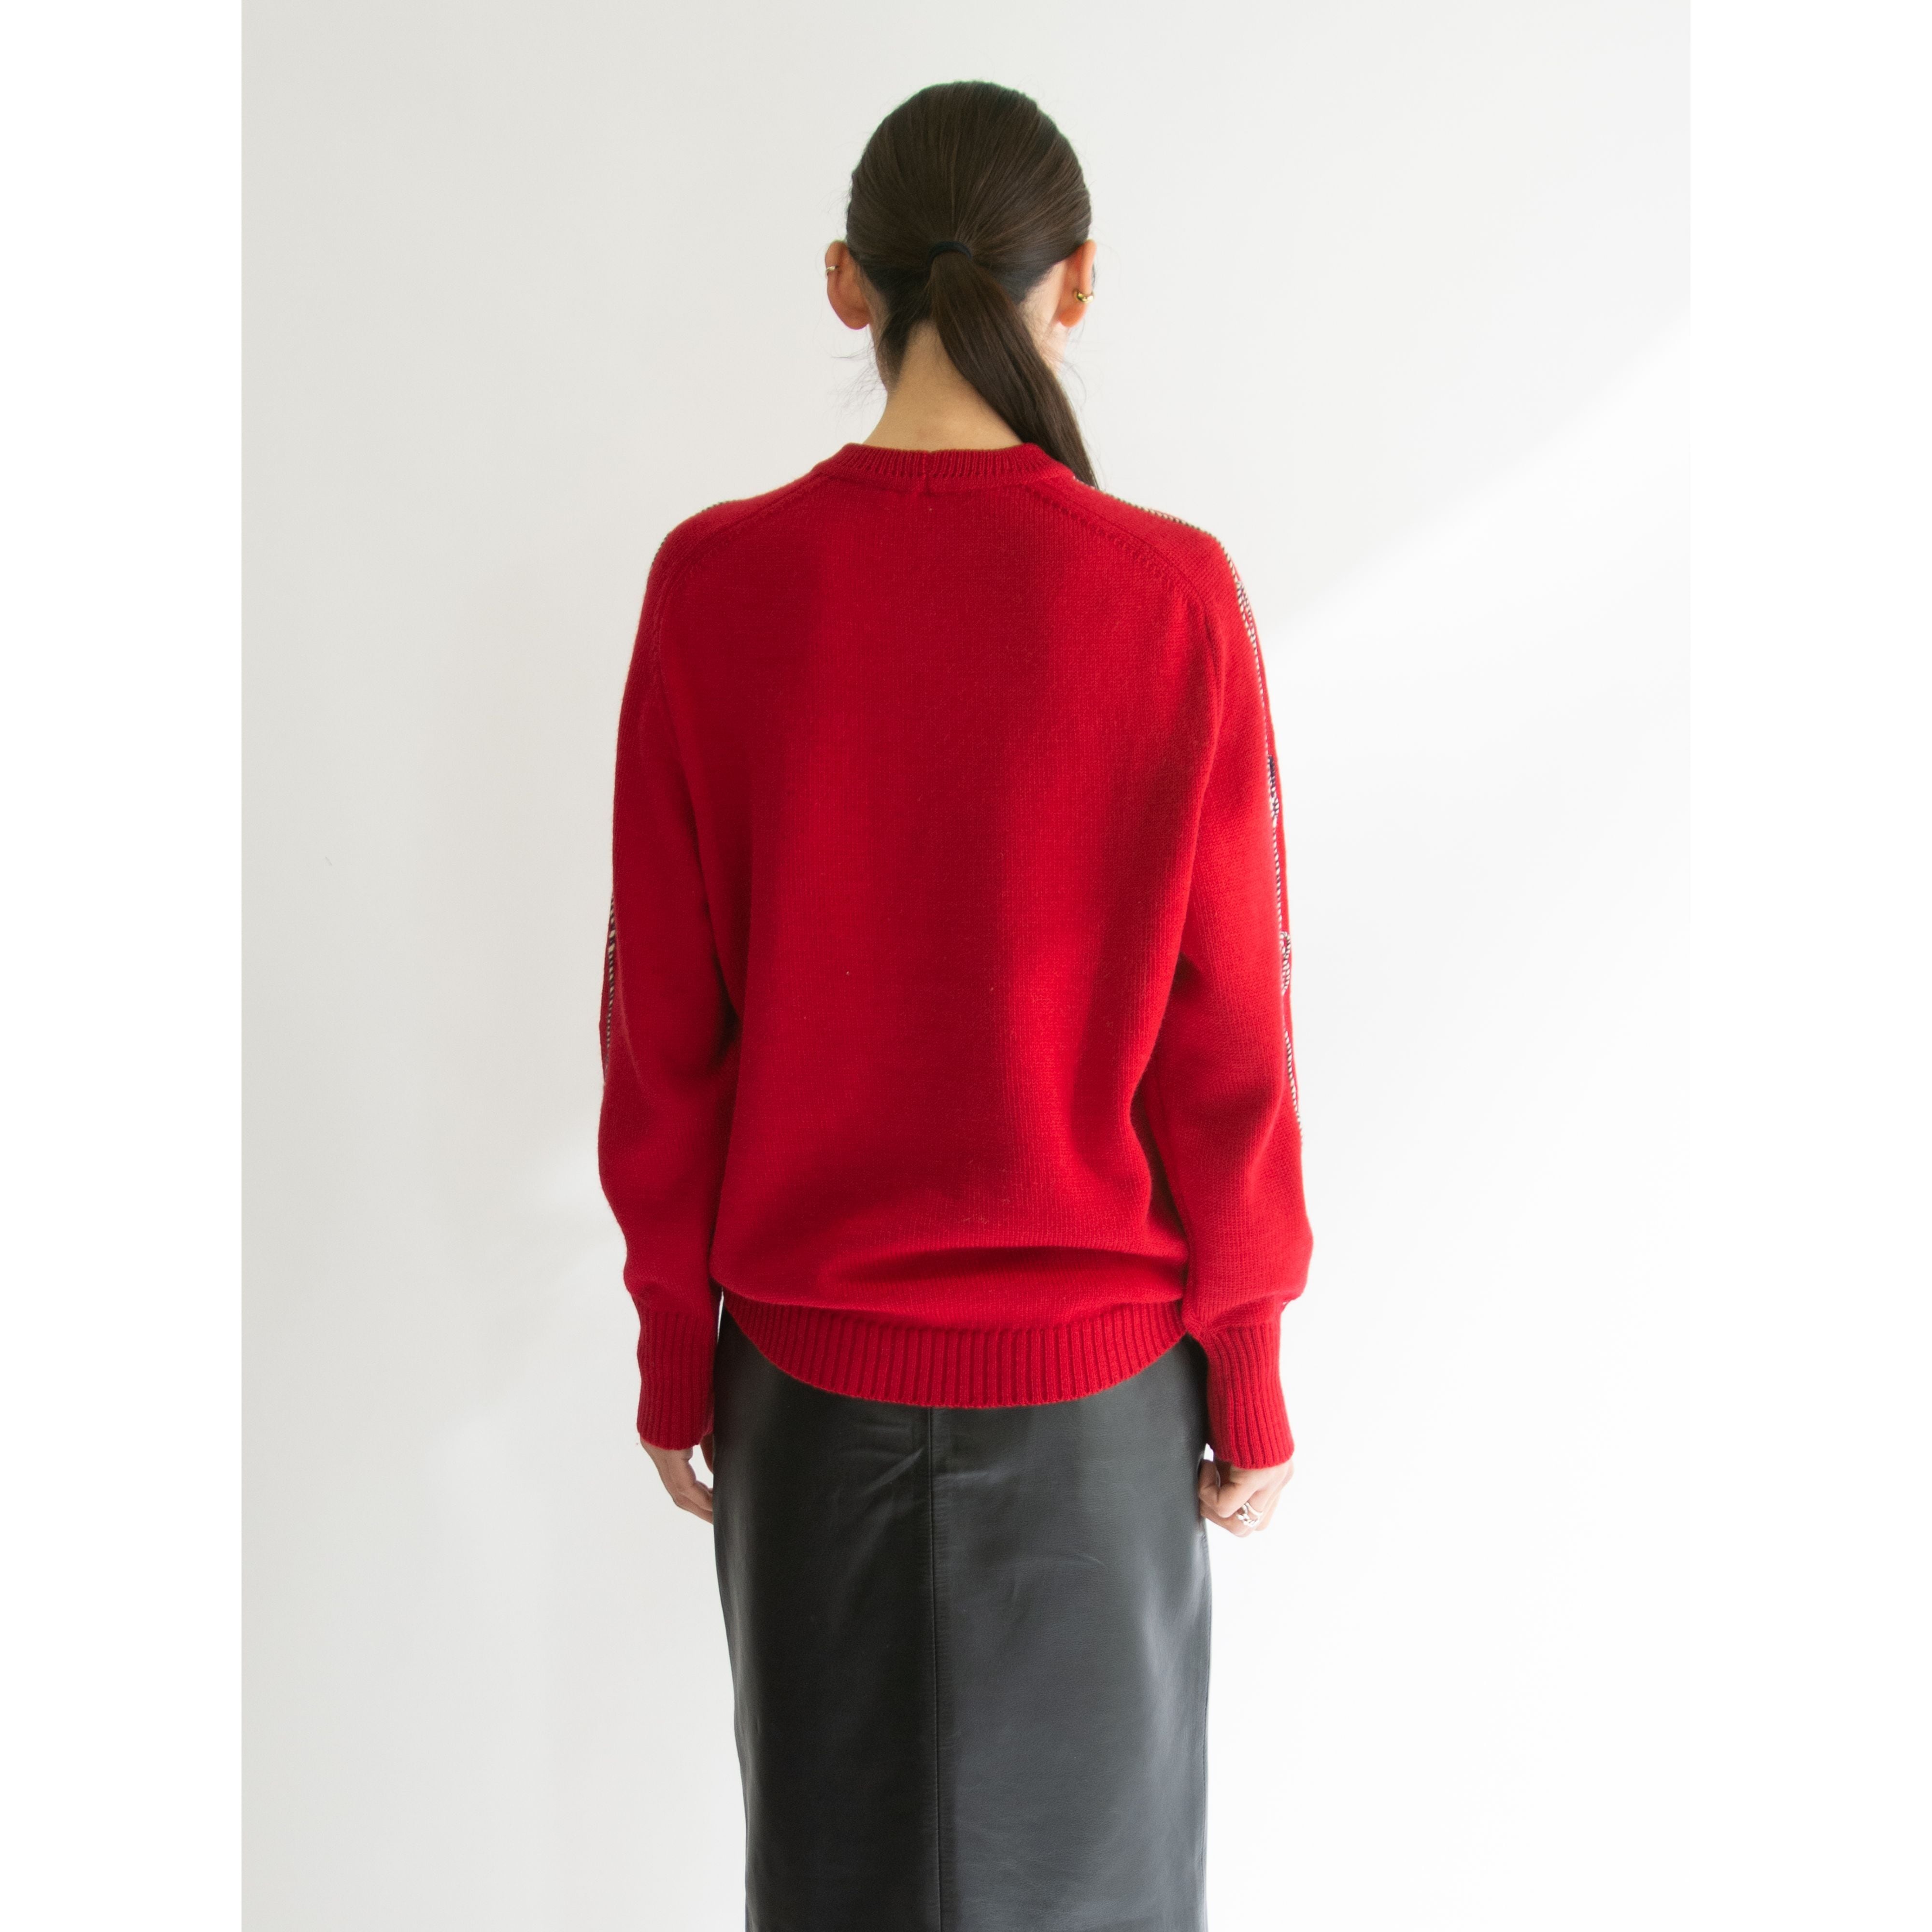 ANDRE GHEKIERE】Wool Crew Neck Sweater（アンドレゲキエール クルー